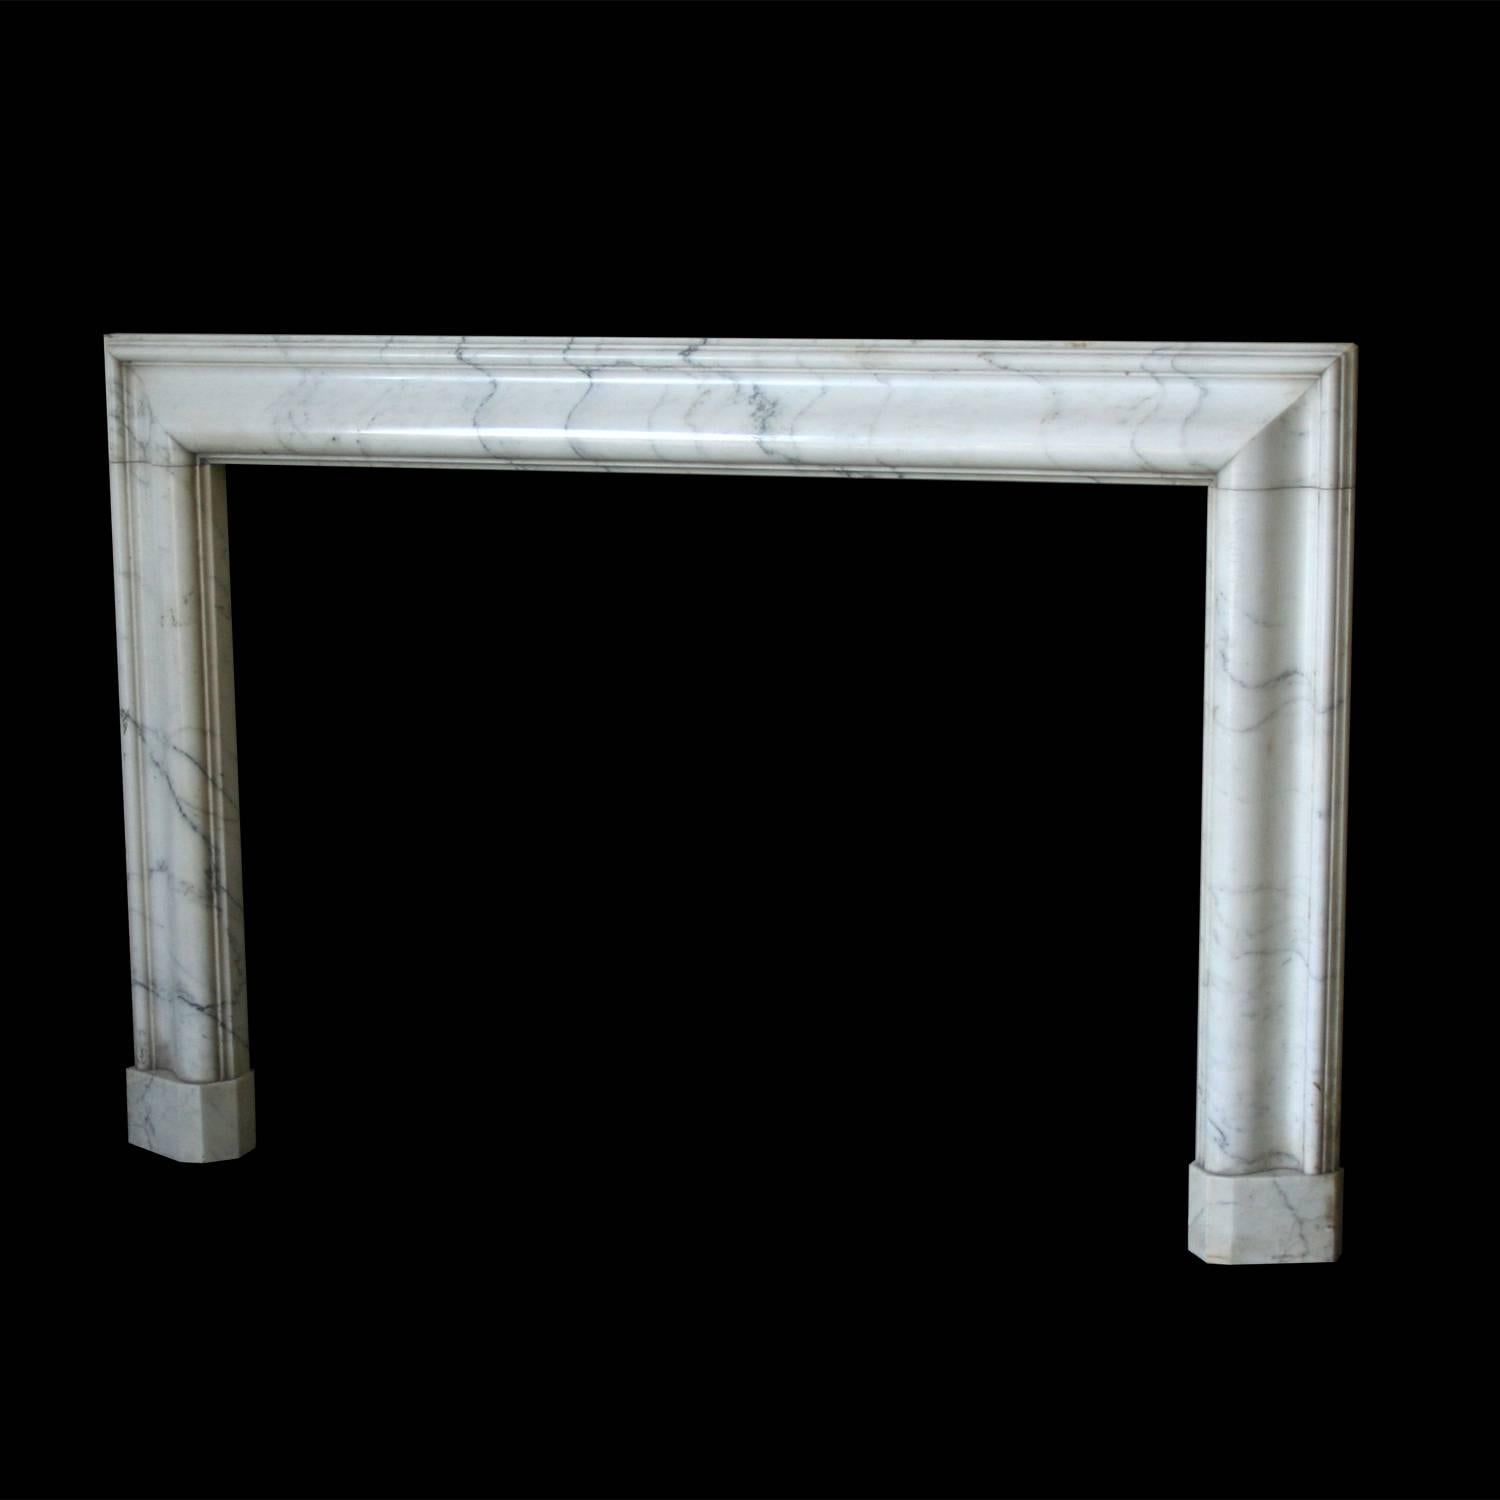 Bolection mantel in statuary marble, circa 1910.

Opening dimensions: 48